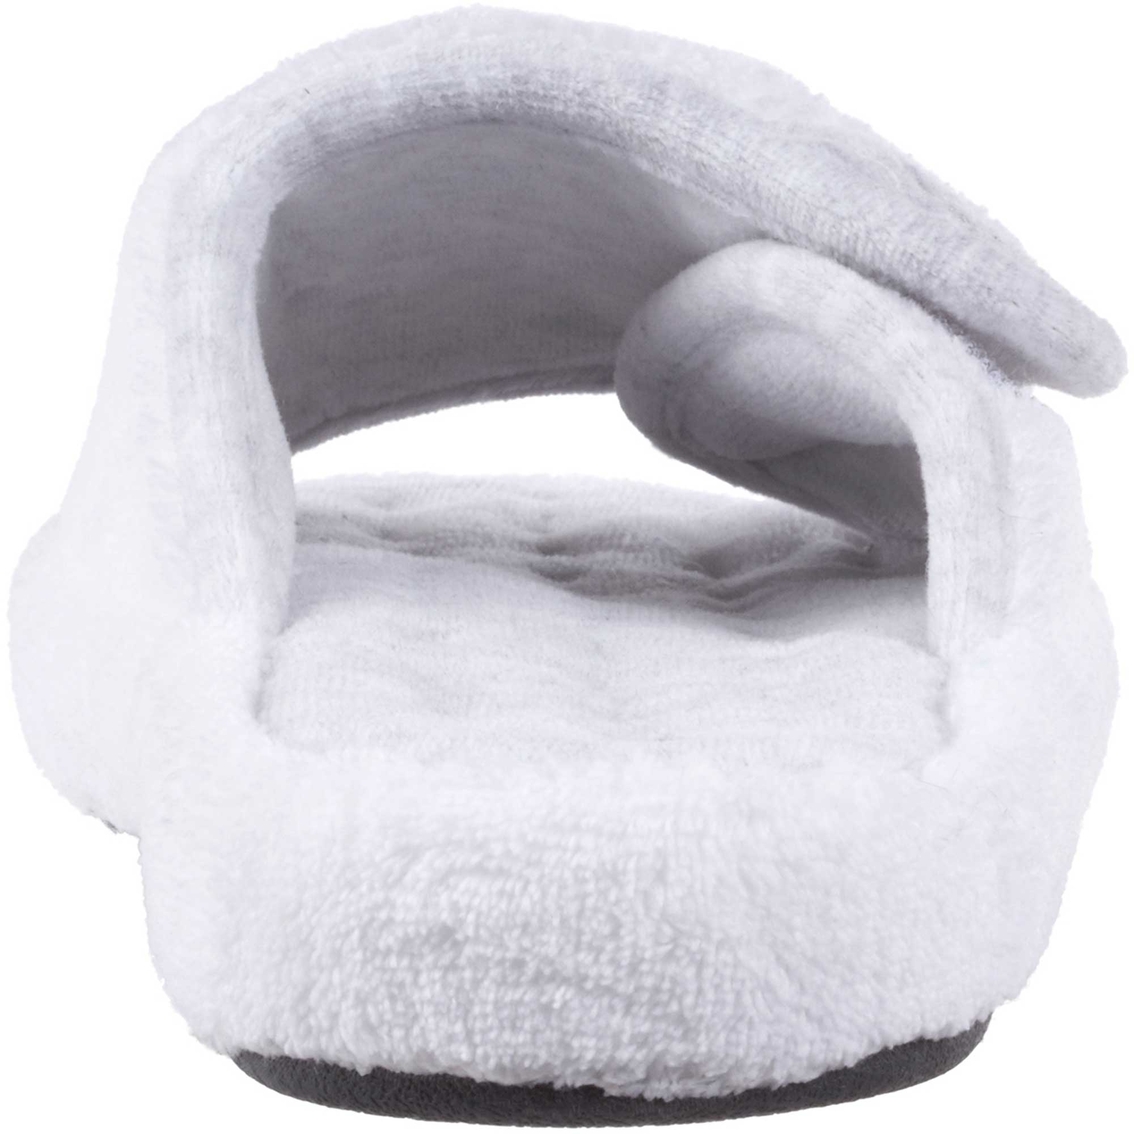 Isotoner Women's Totes  Microterry Pillow Step Spa Slippers - Image 6 of 6